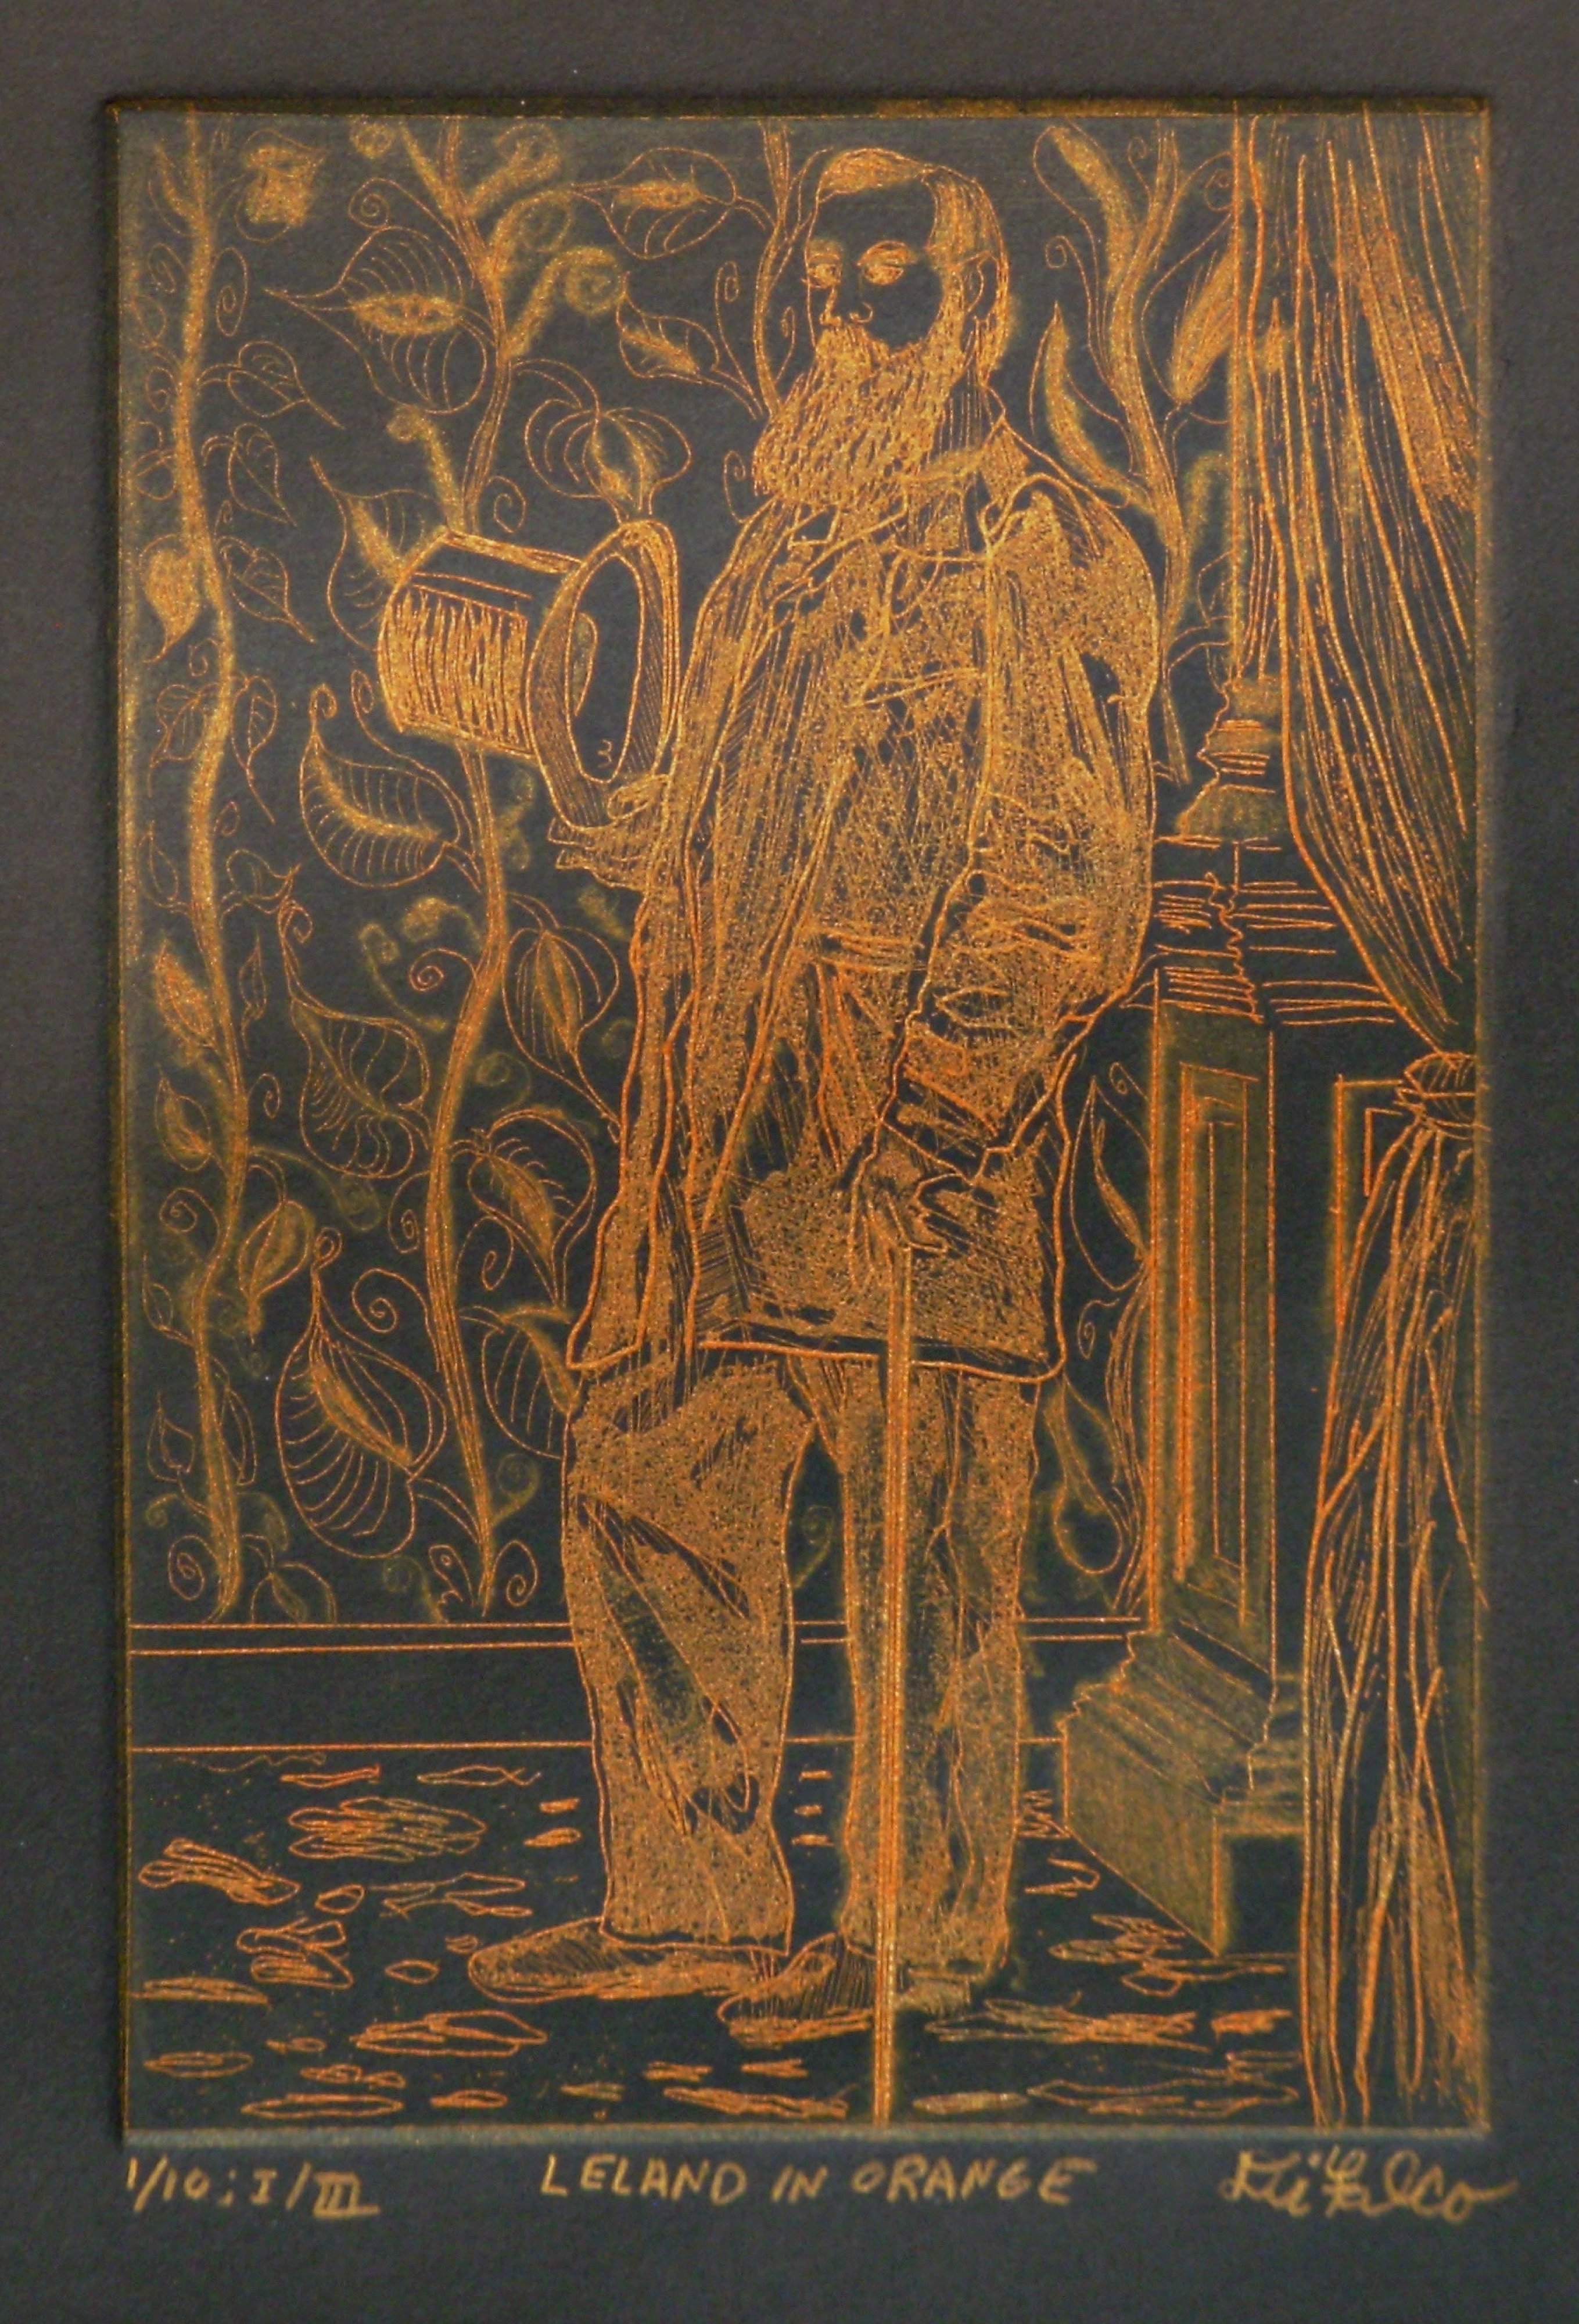 Jerry  Di Falco: 'LELAND IN ORANGE', 2014 Etching, Famous People. Full title is LELAND IN ORANGE. Print measures 9inches by 11inches, or 22. 86cm by 27. 94cm. Done on STONEHENGE black paper with oil- based etching inks. Several acid baths were necessary to achieve this overall misty effect, as well as gold pigment. This intimate work is based on an ...